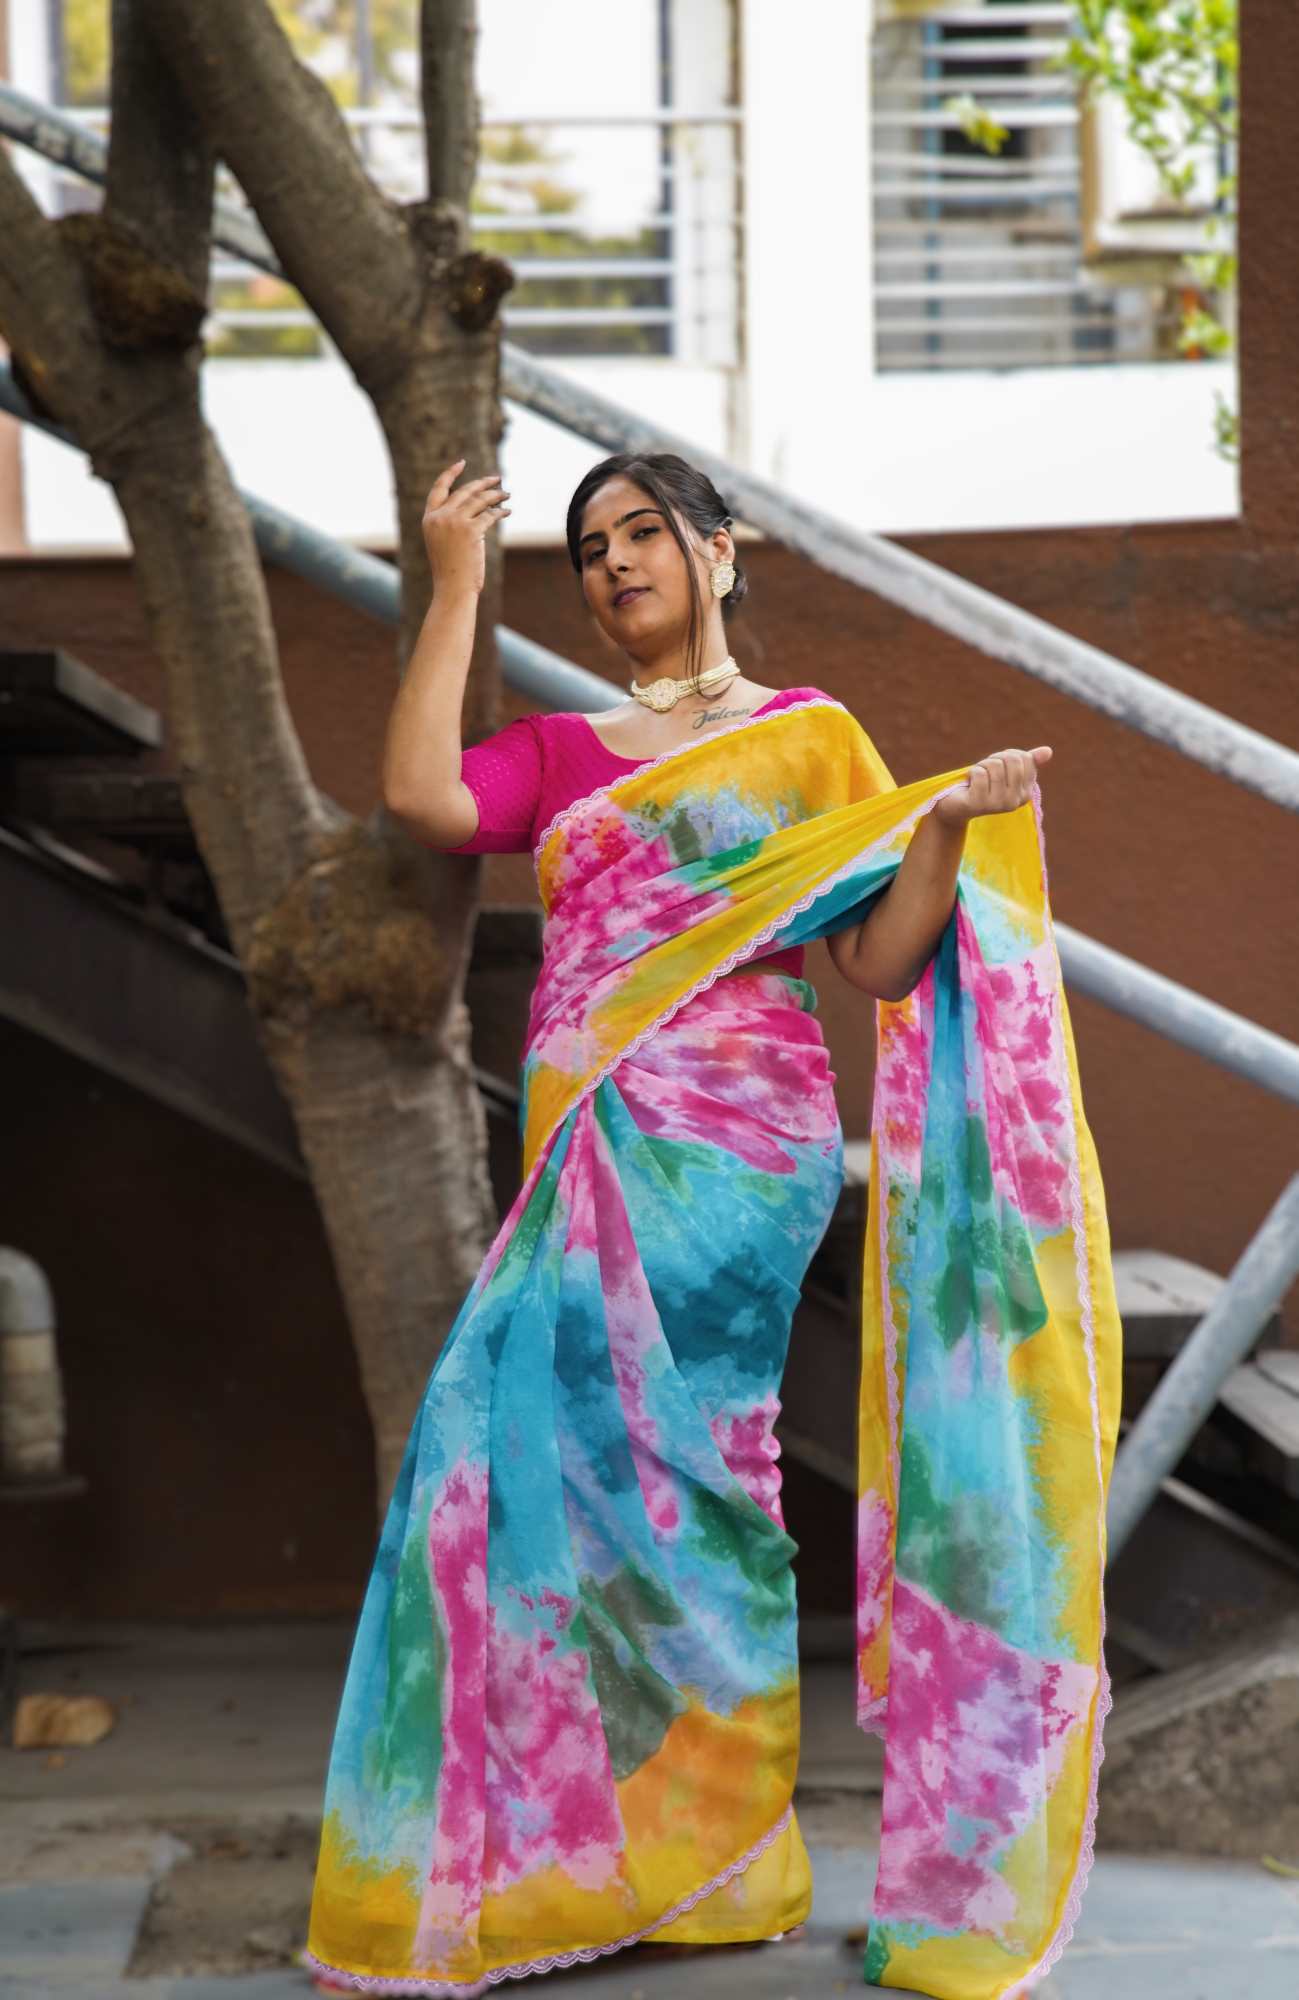 Ready To Wear Alia Bhatt Inspired Rocky Rani Multi Color With Lace Wrap in 1 minute saree